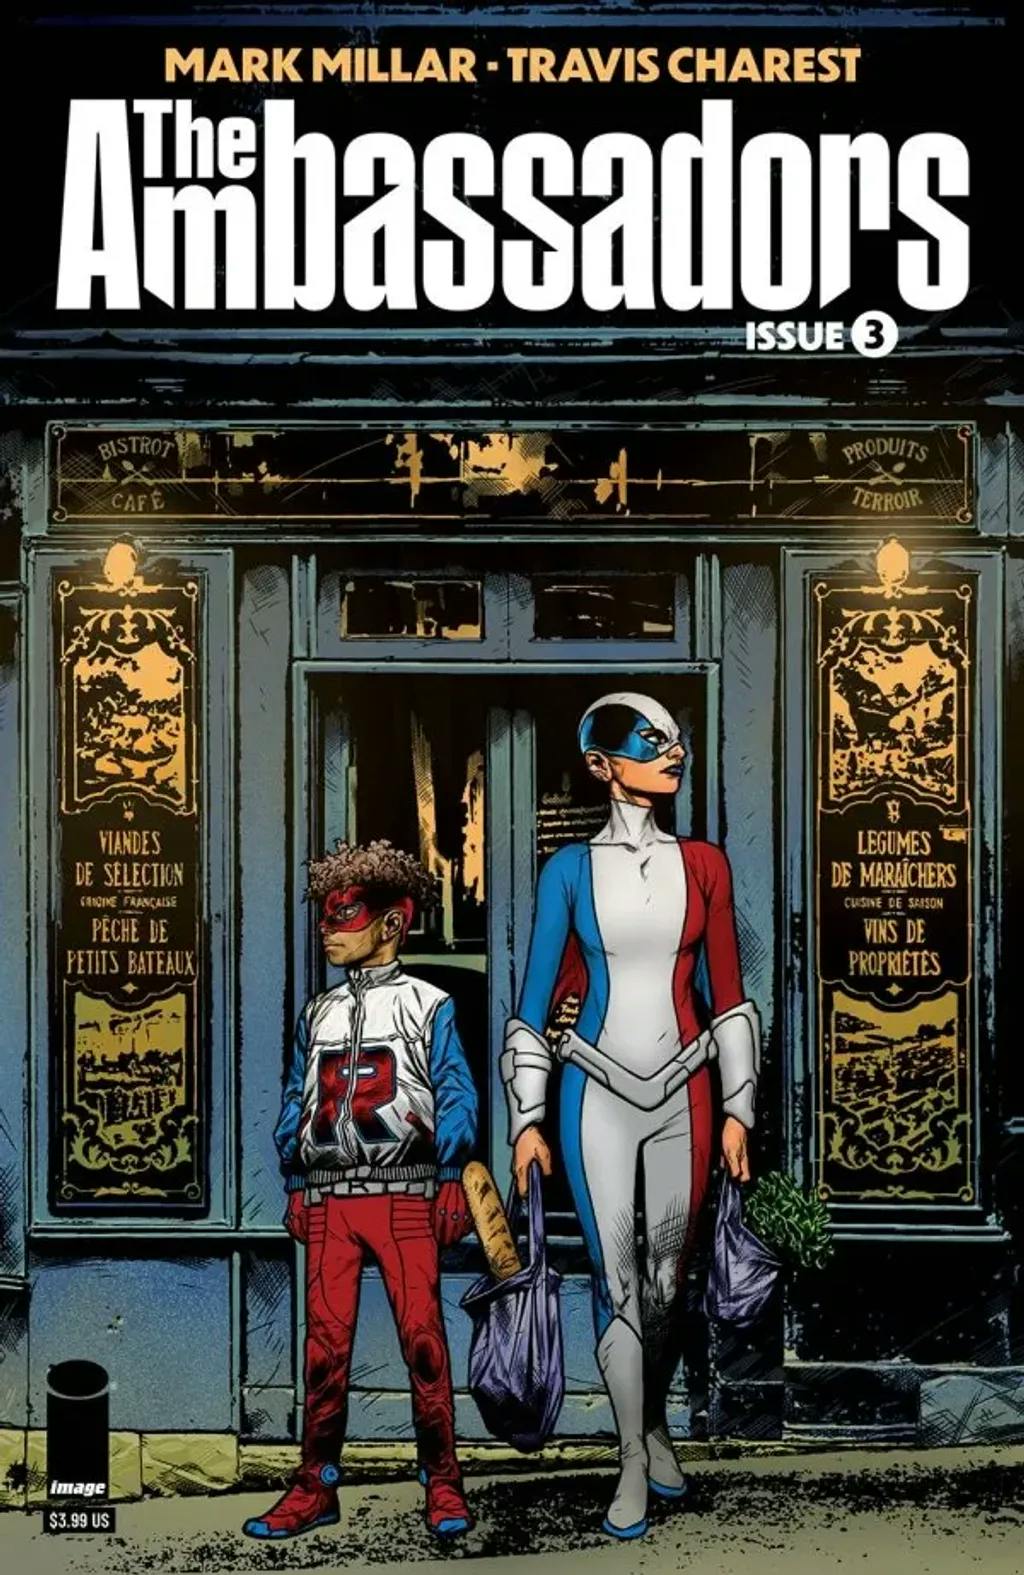 The Ambassadors #3 By Mark Millar and Travis Charest